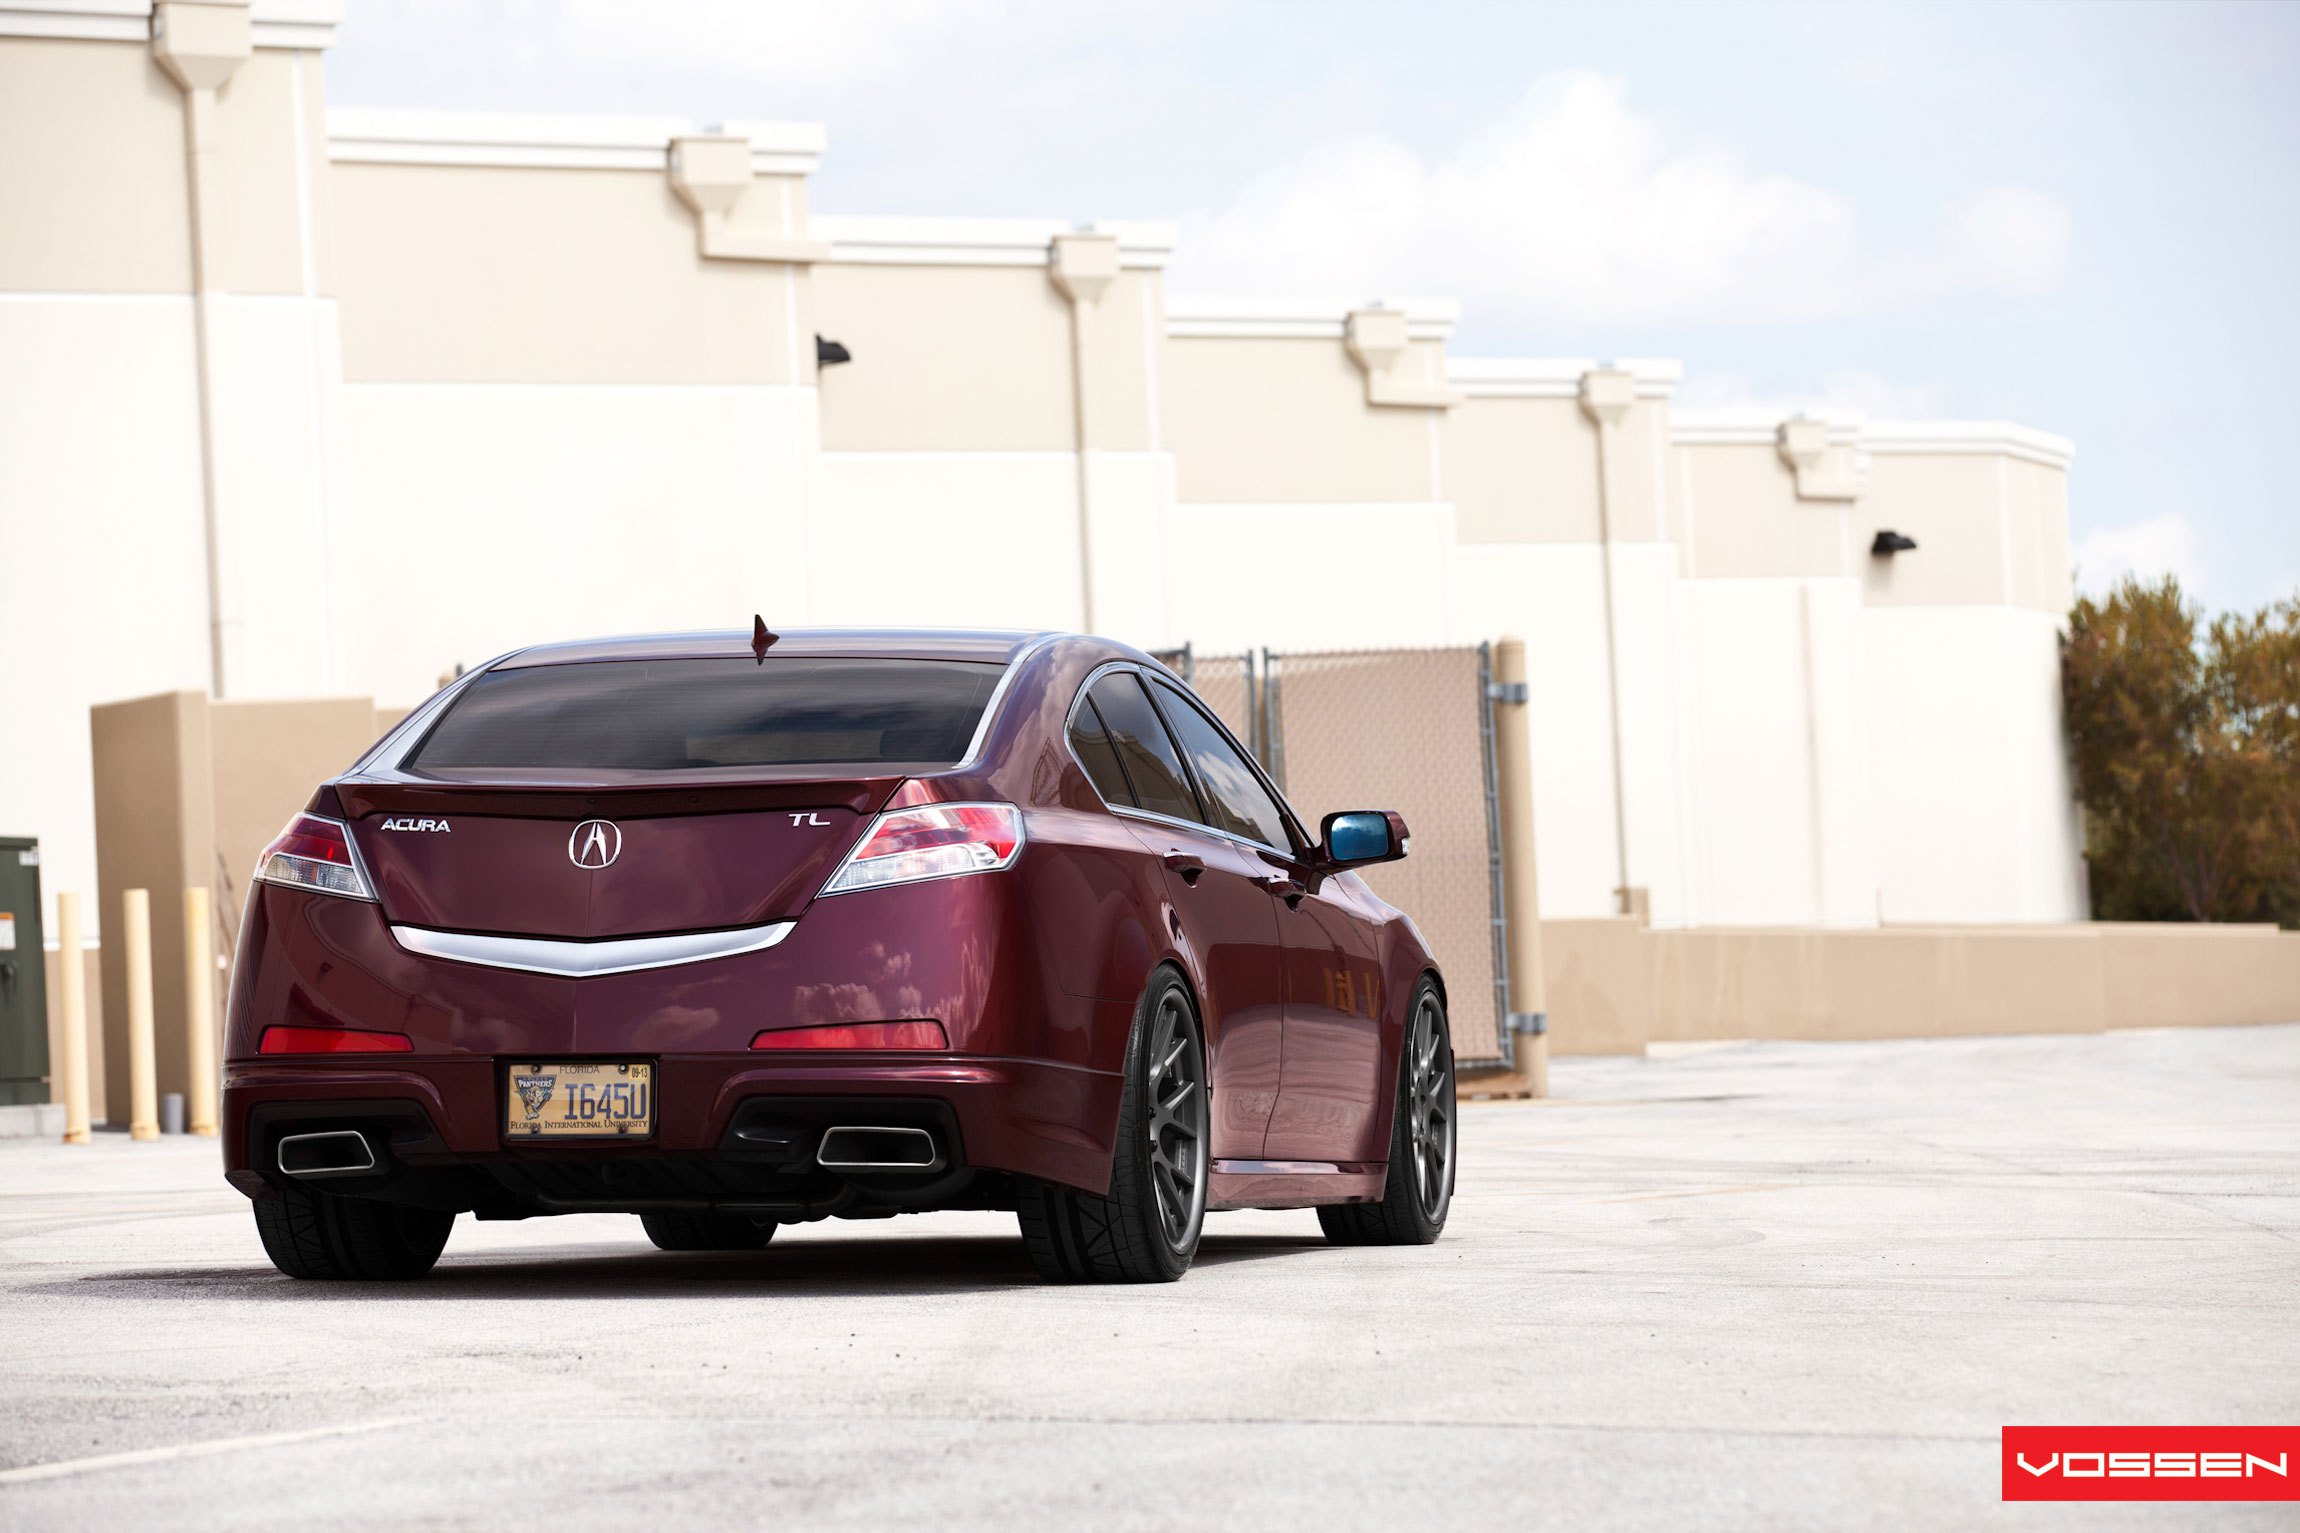 Aftermarket Rear Bumper Cover on Red Acura TL - Photo by Vossen